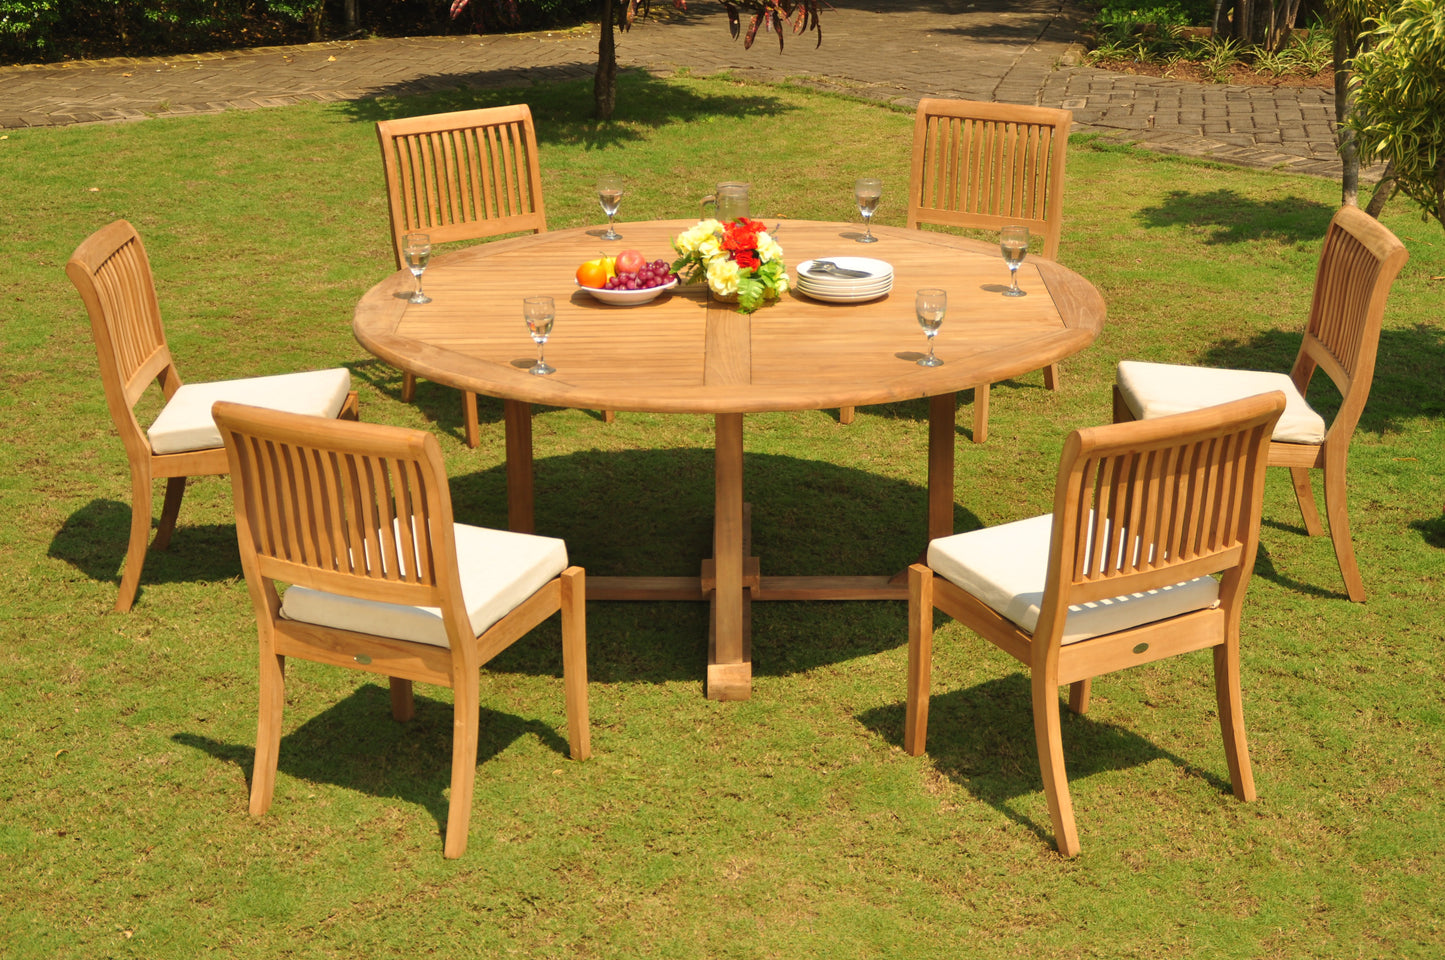 72" Round Table and Arbor Armless Chairs